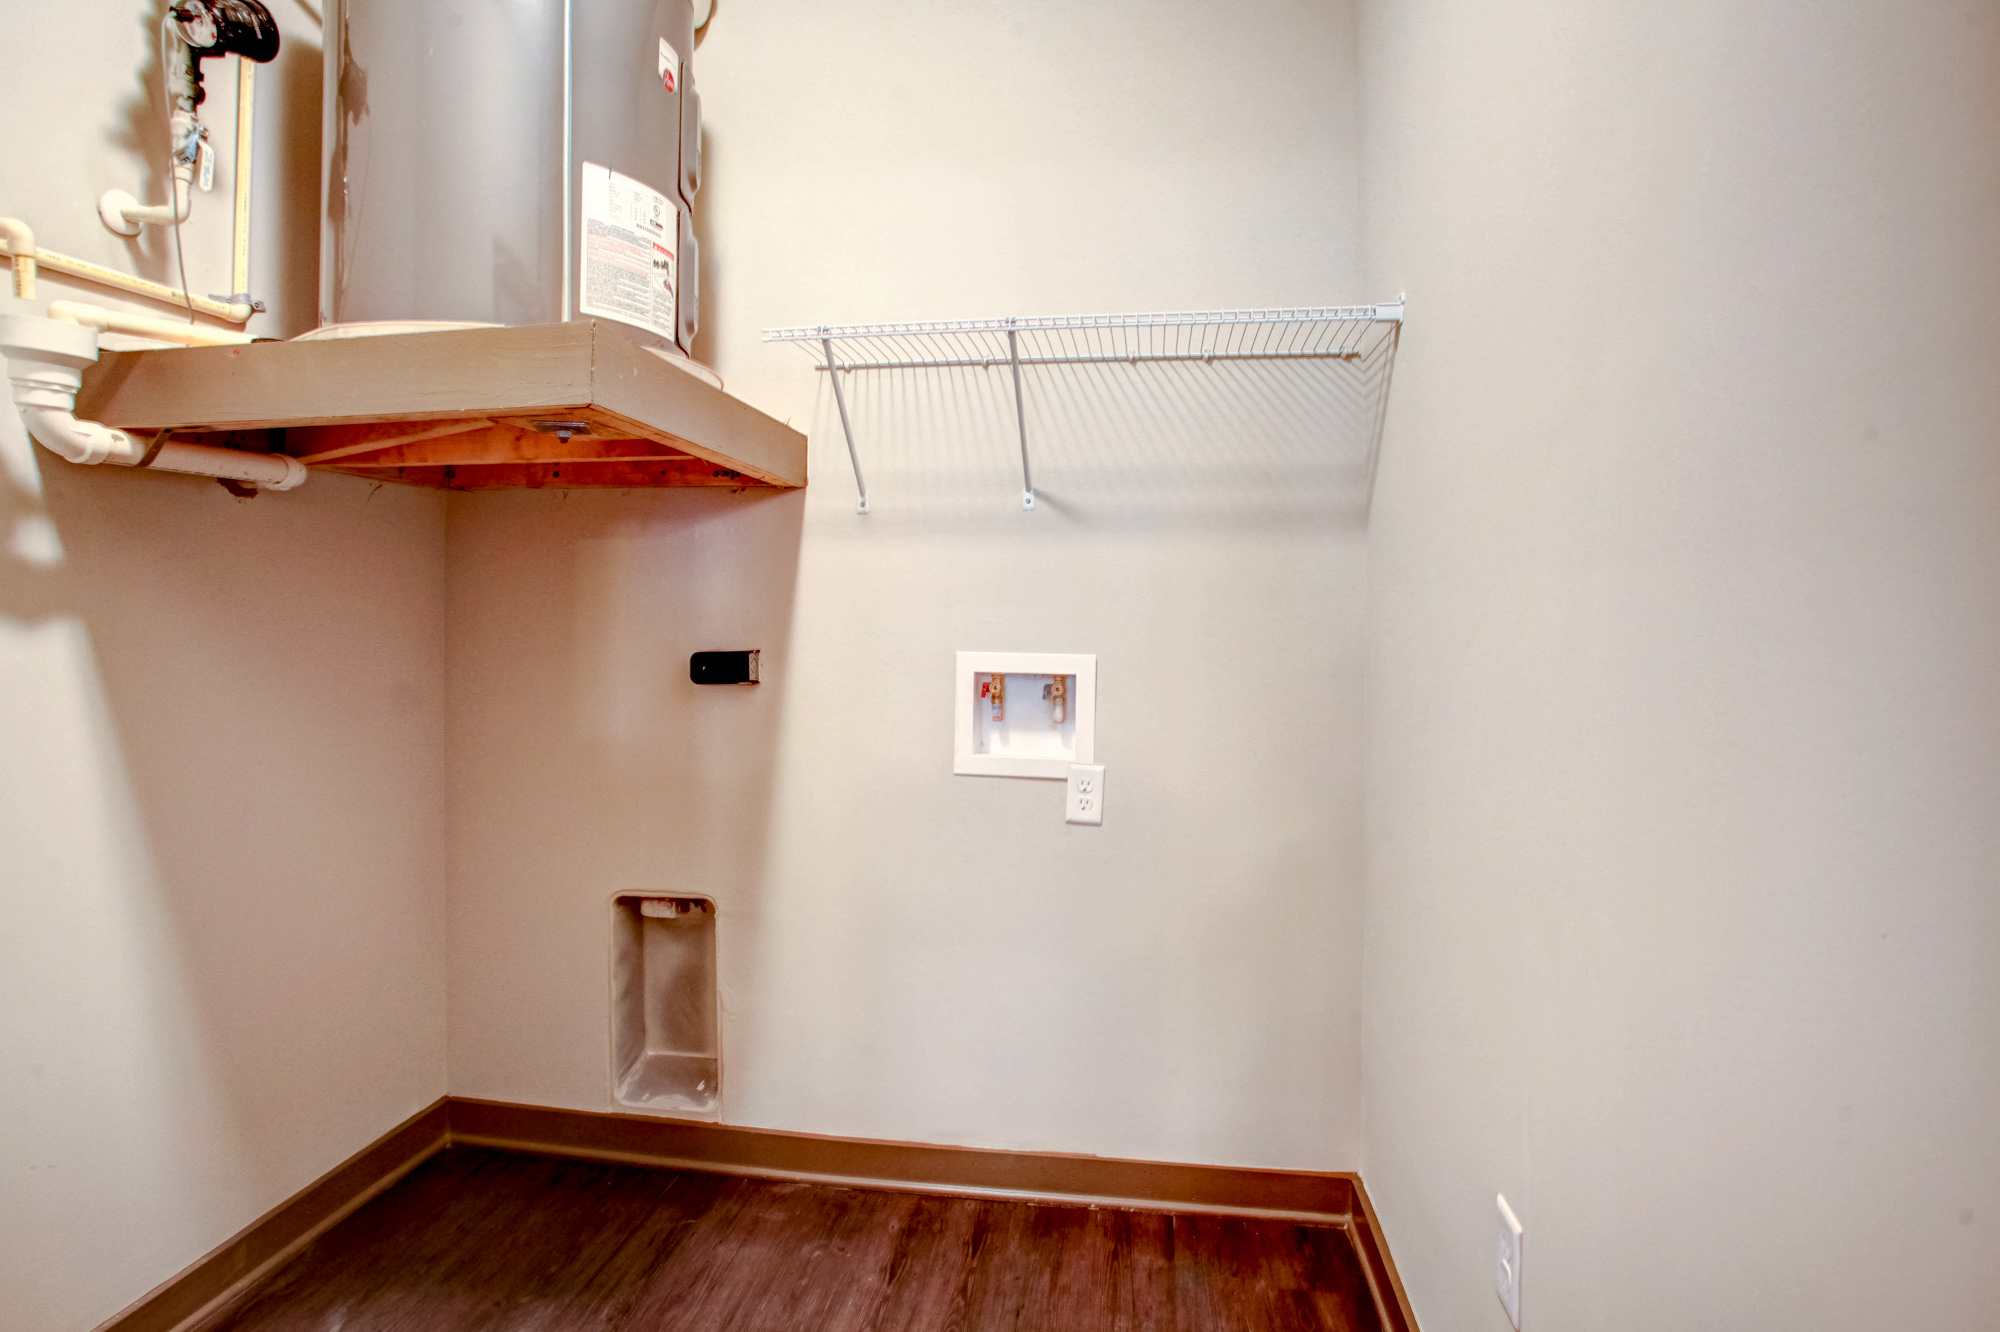 A spacious closet with washer and dryer connection.